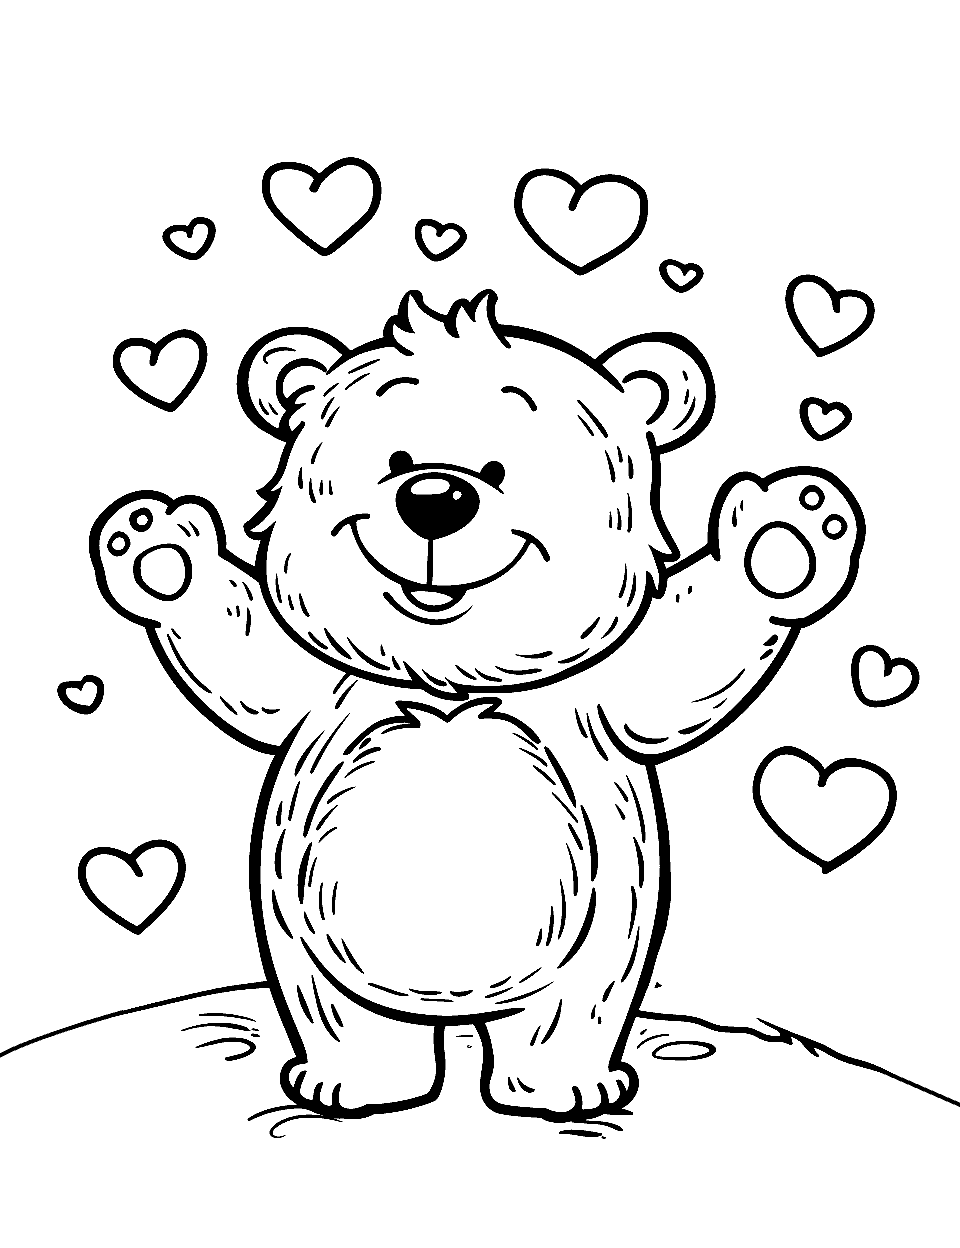 Teddy Bear Spreading Love Coloring Page - A teddy bear with arms wide open, surrounded by hearts.